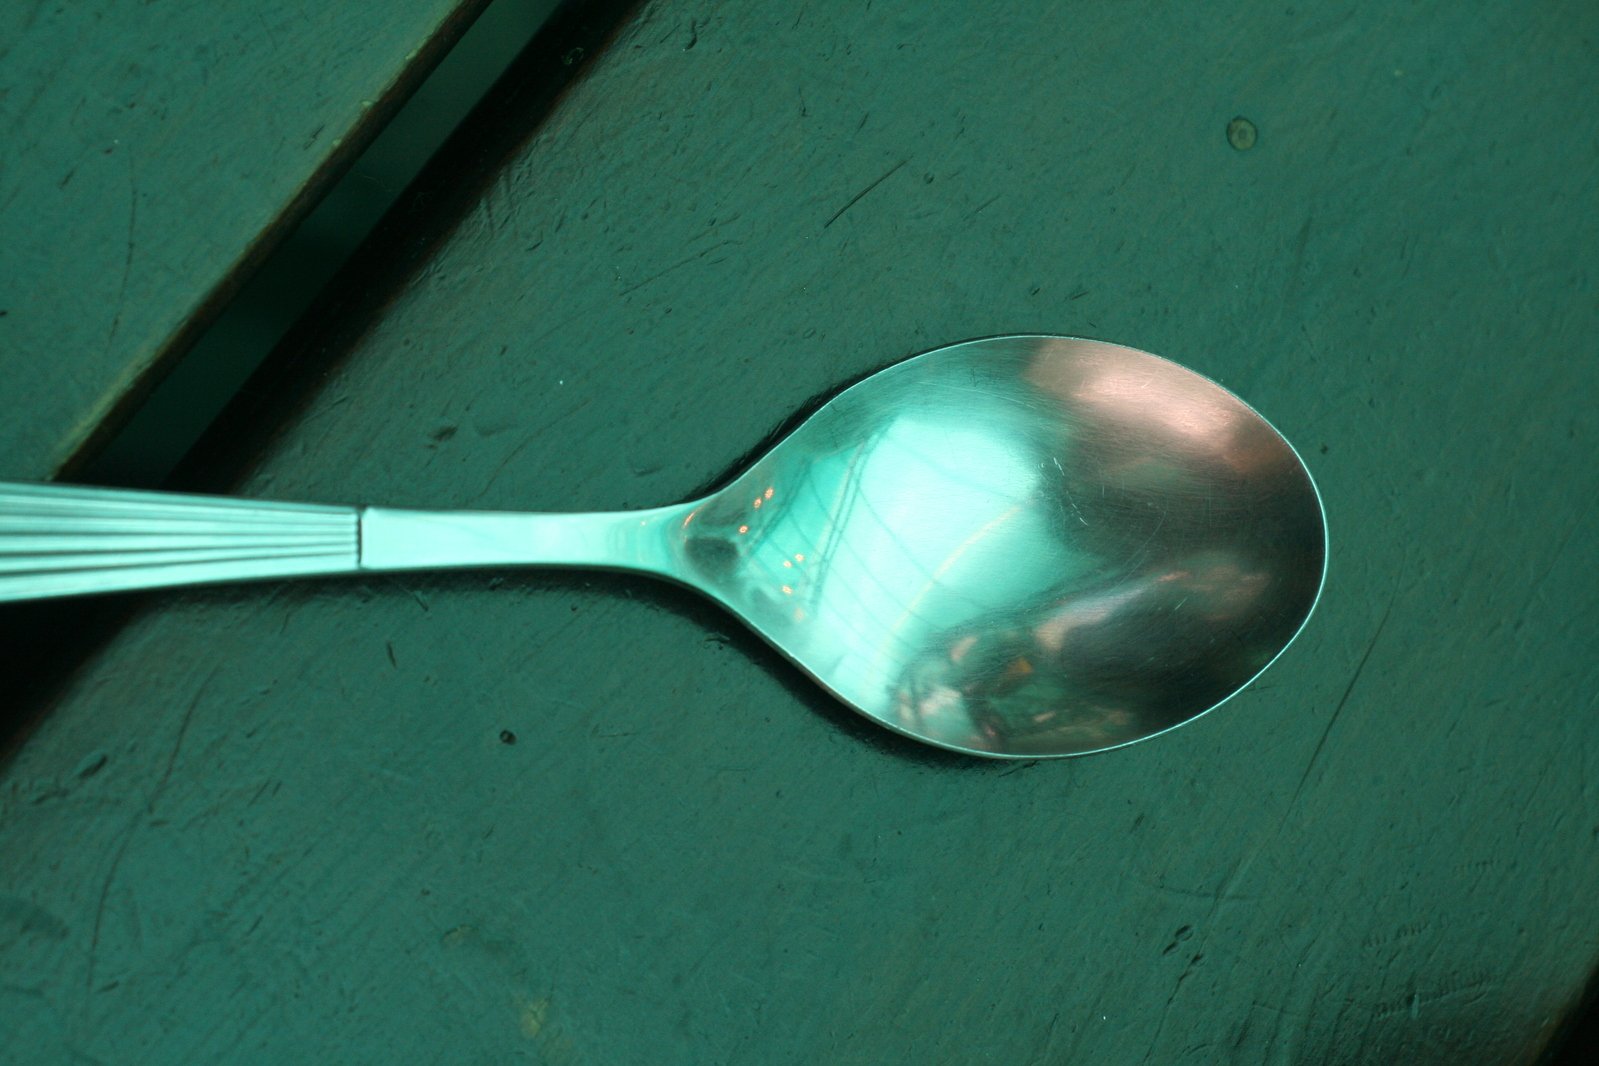 the silver spoon sits on a green wooden surface